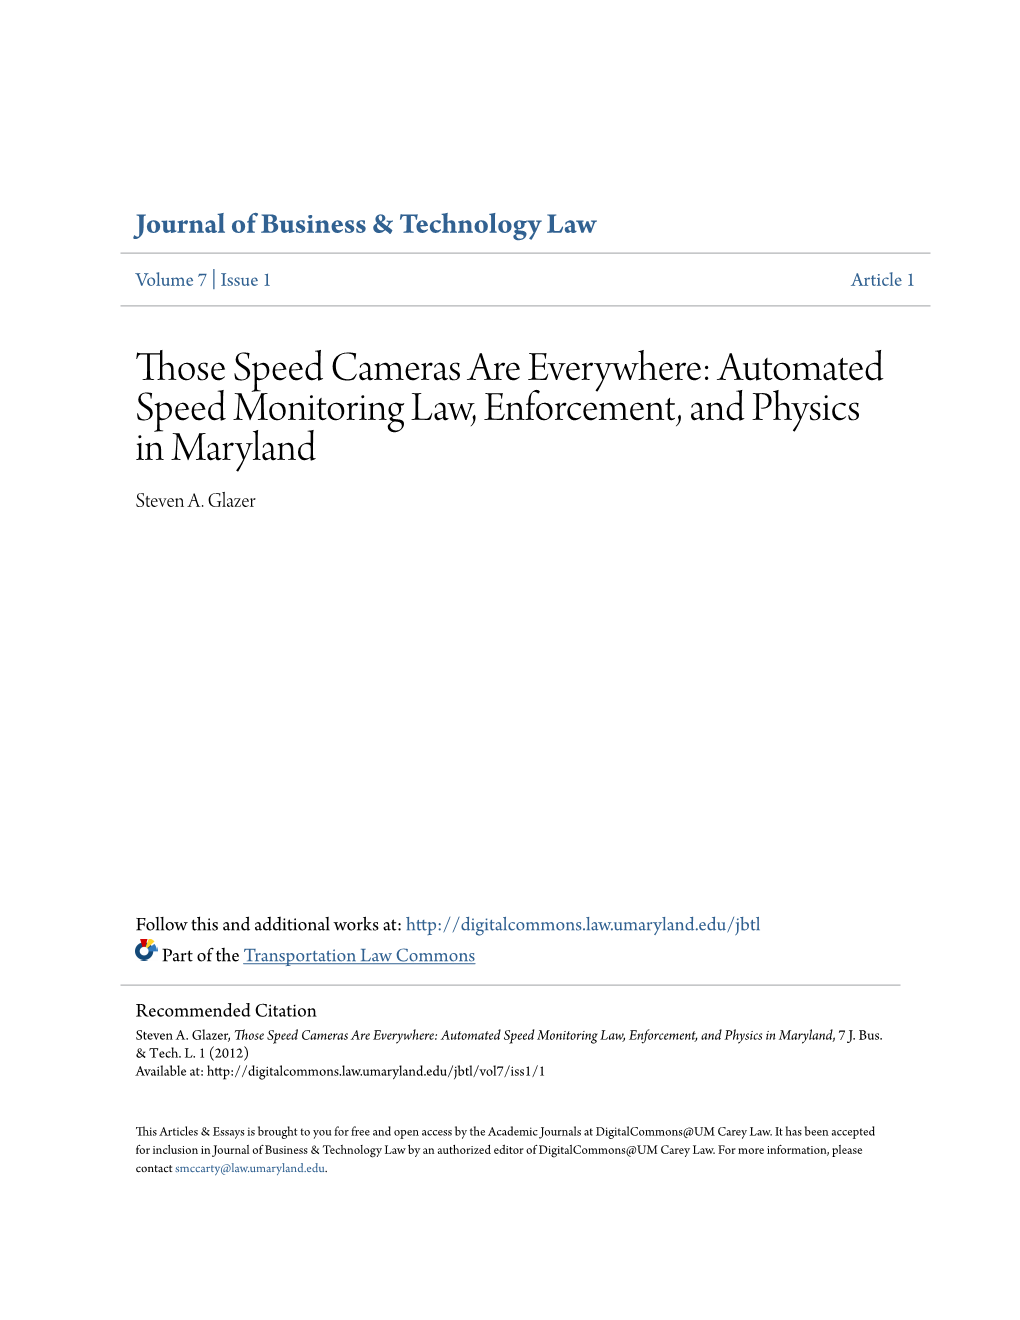 Automated Speed Monitoring Law, Enforcement, and Physics in Maryland Steven A